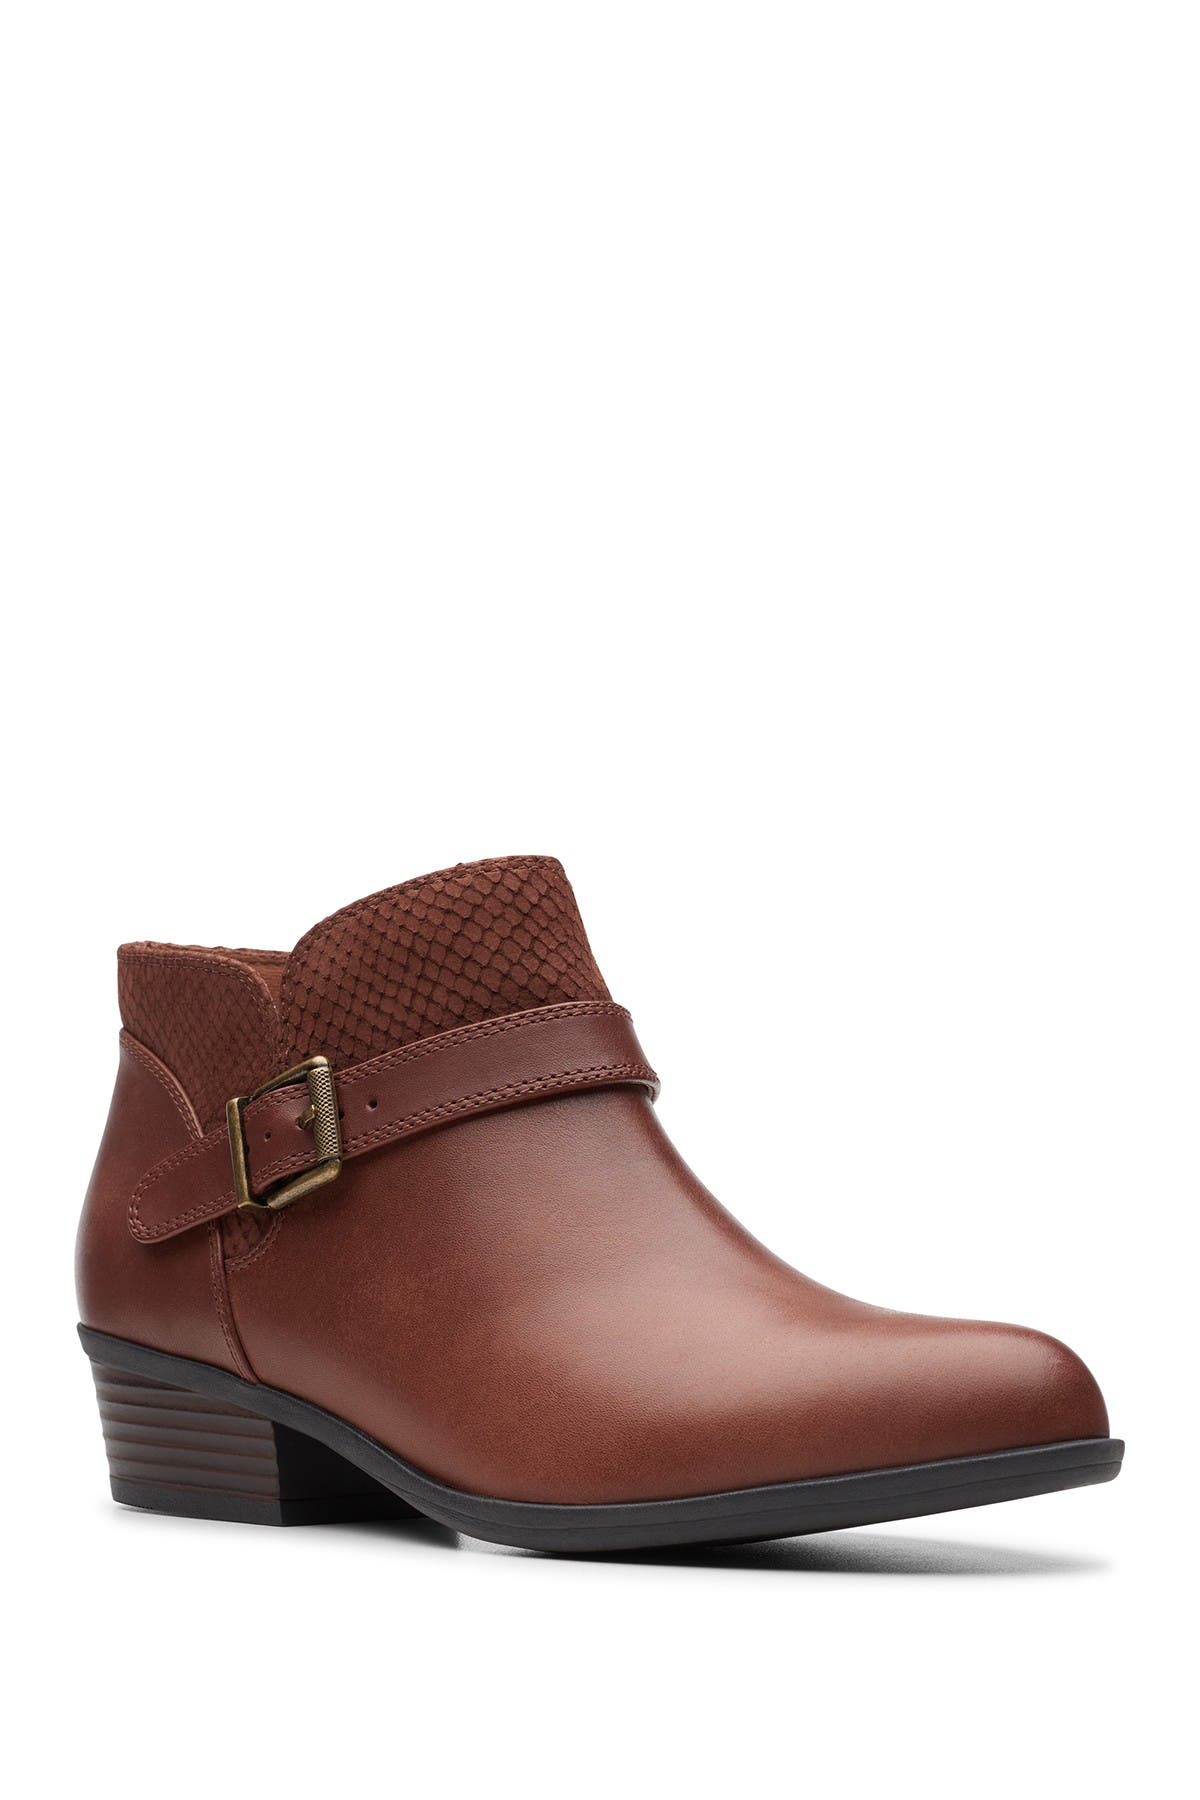 Clarks | Addiy Sharilyn Ankle Boot 